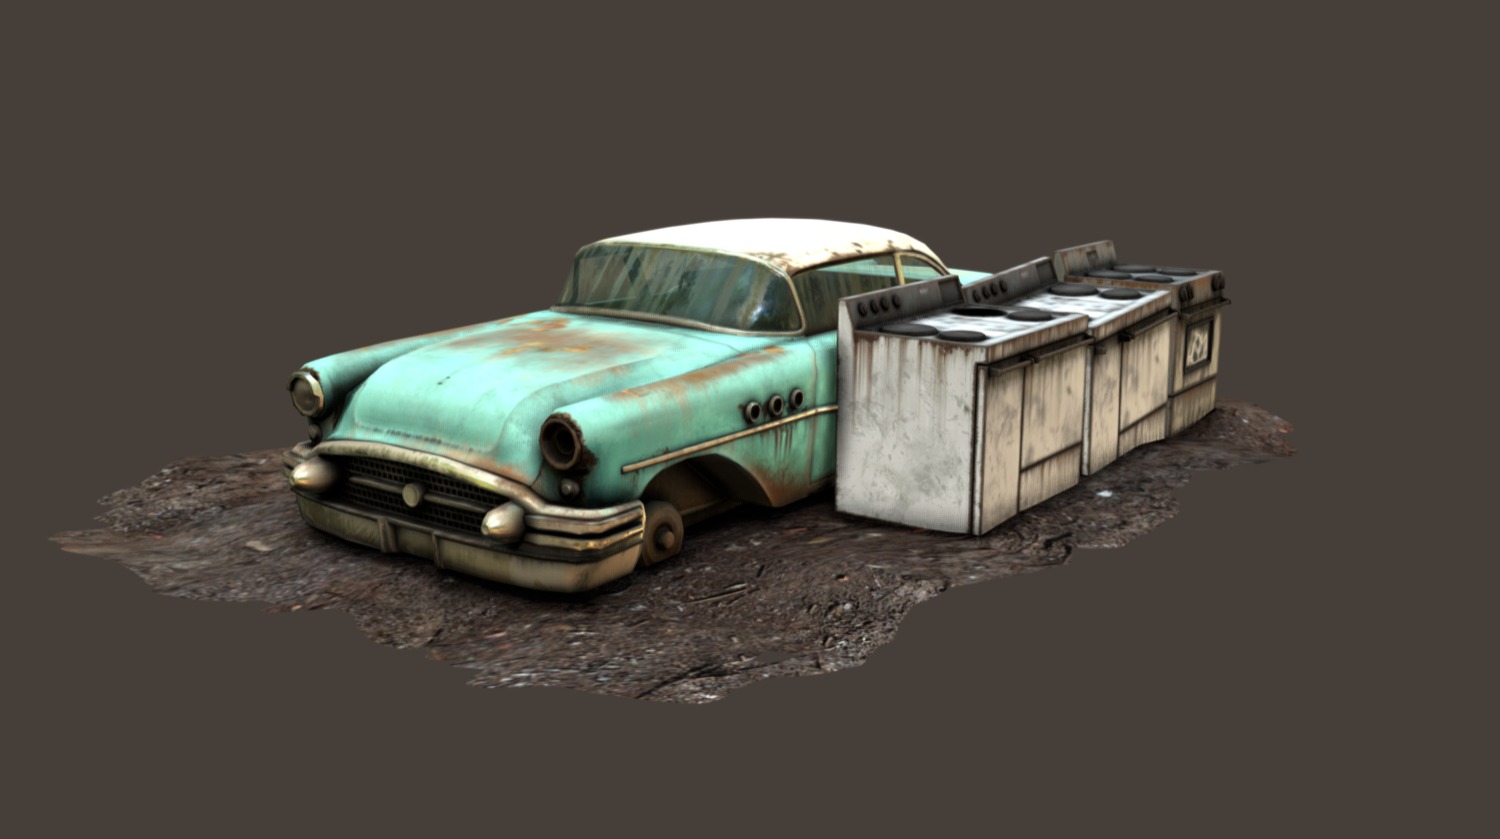 An old buick and some ovens rotting in a junkyard somewhere. I've been trying to do some more scene-ish stuf with these.

Made with 3DSMax, Topogun, and Substance Painter 3d model